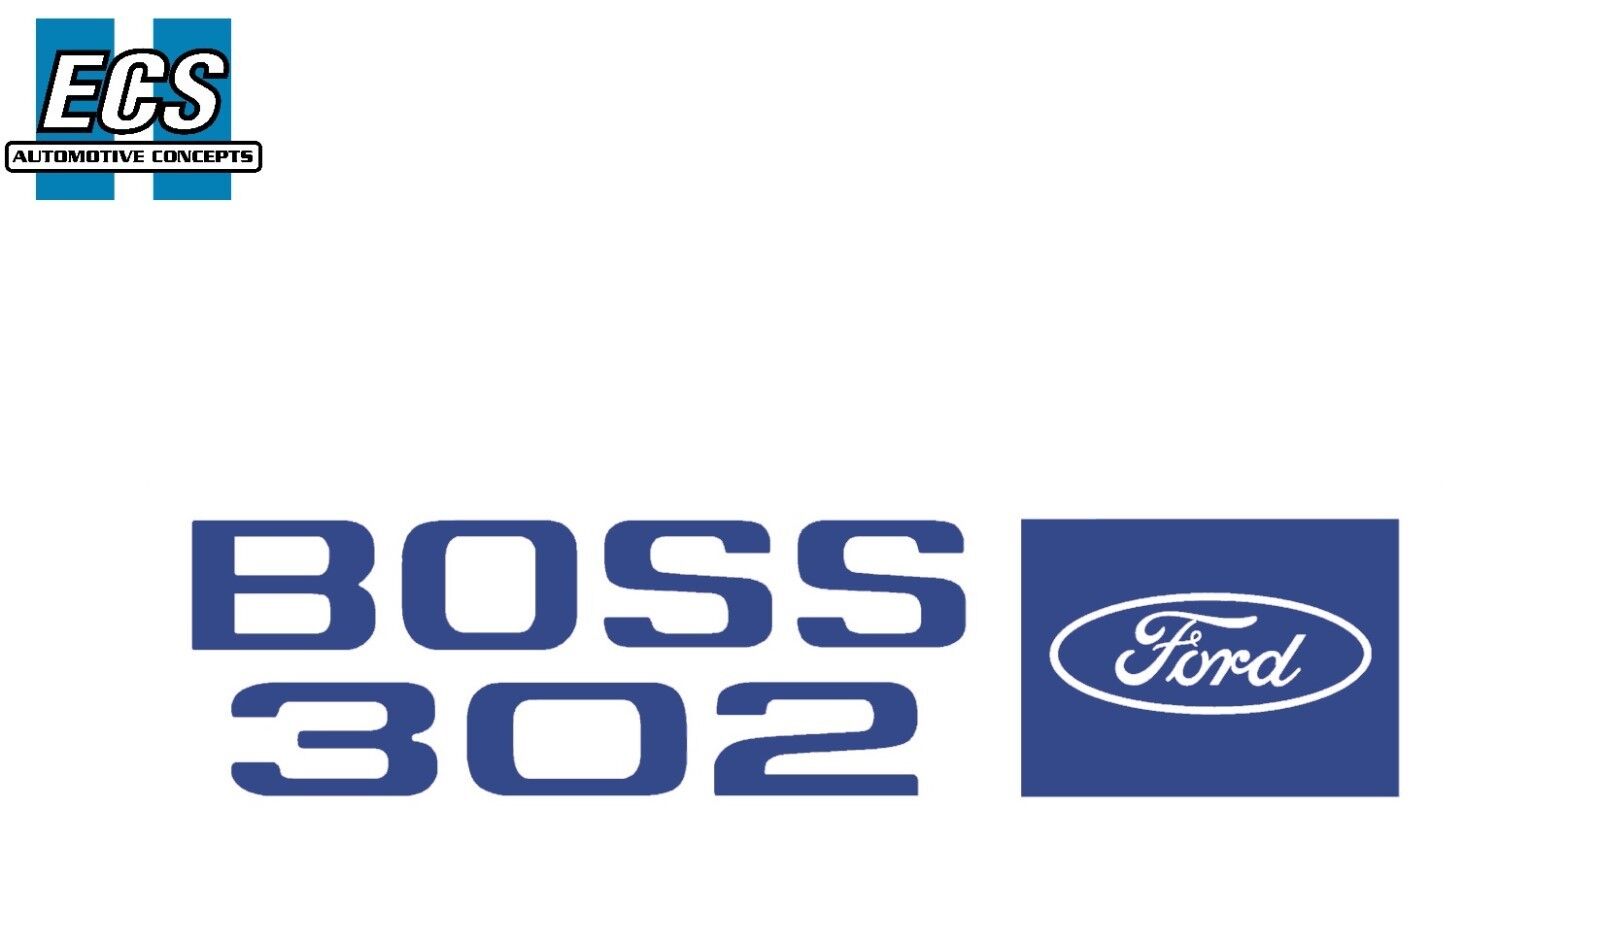 1969 1970 Ford Mustang Boss 302 Valve Cover Decal Factory Exact w/o Part Numbers